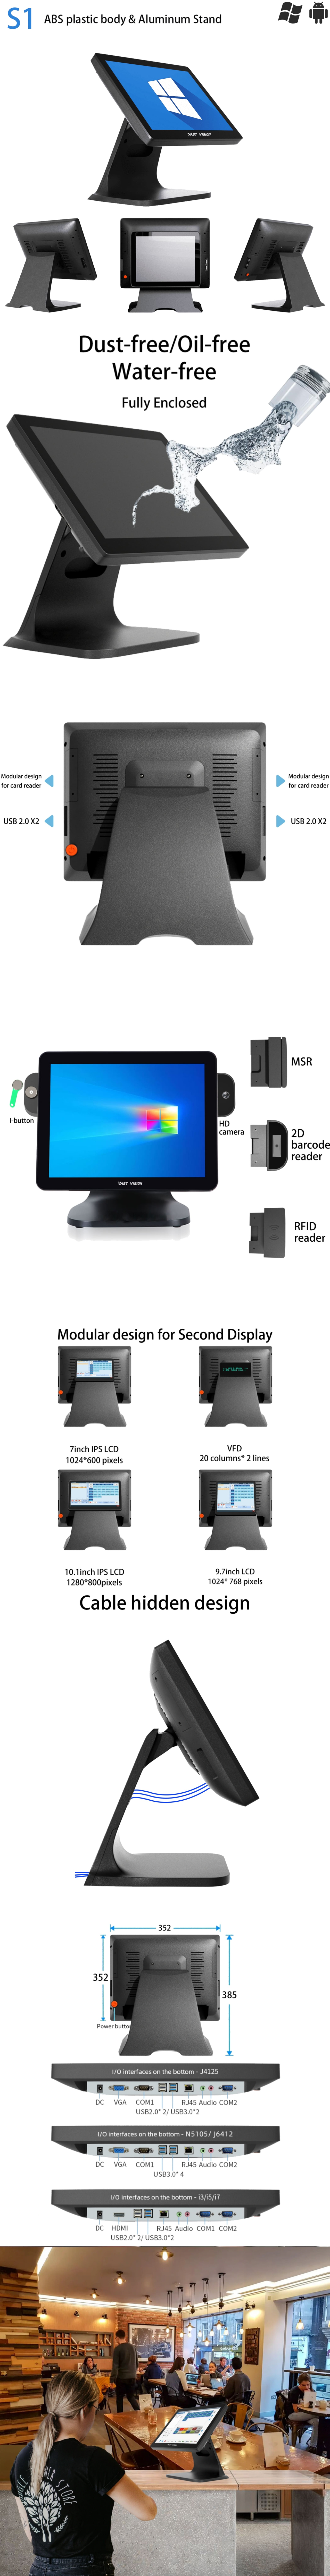 15 inch pos system POS system for Retail store.jpg